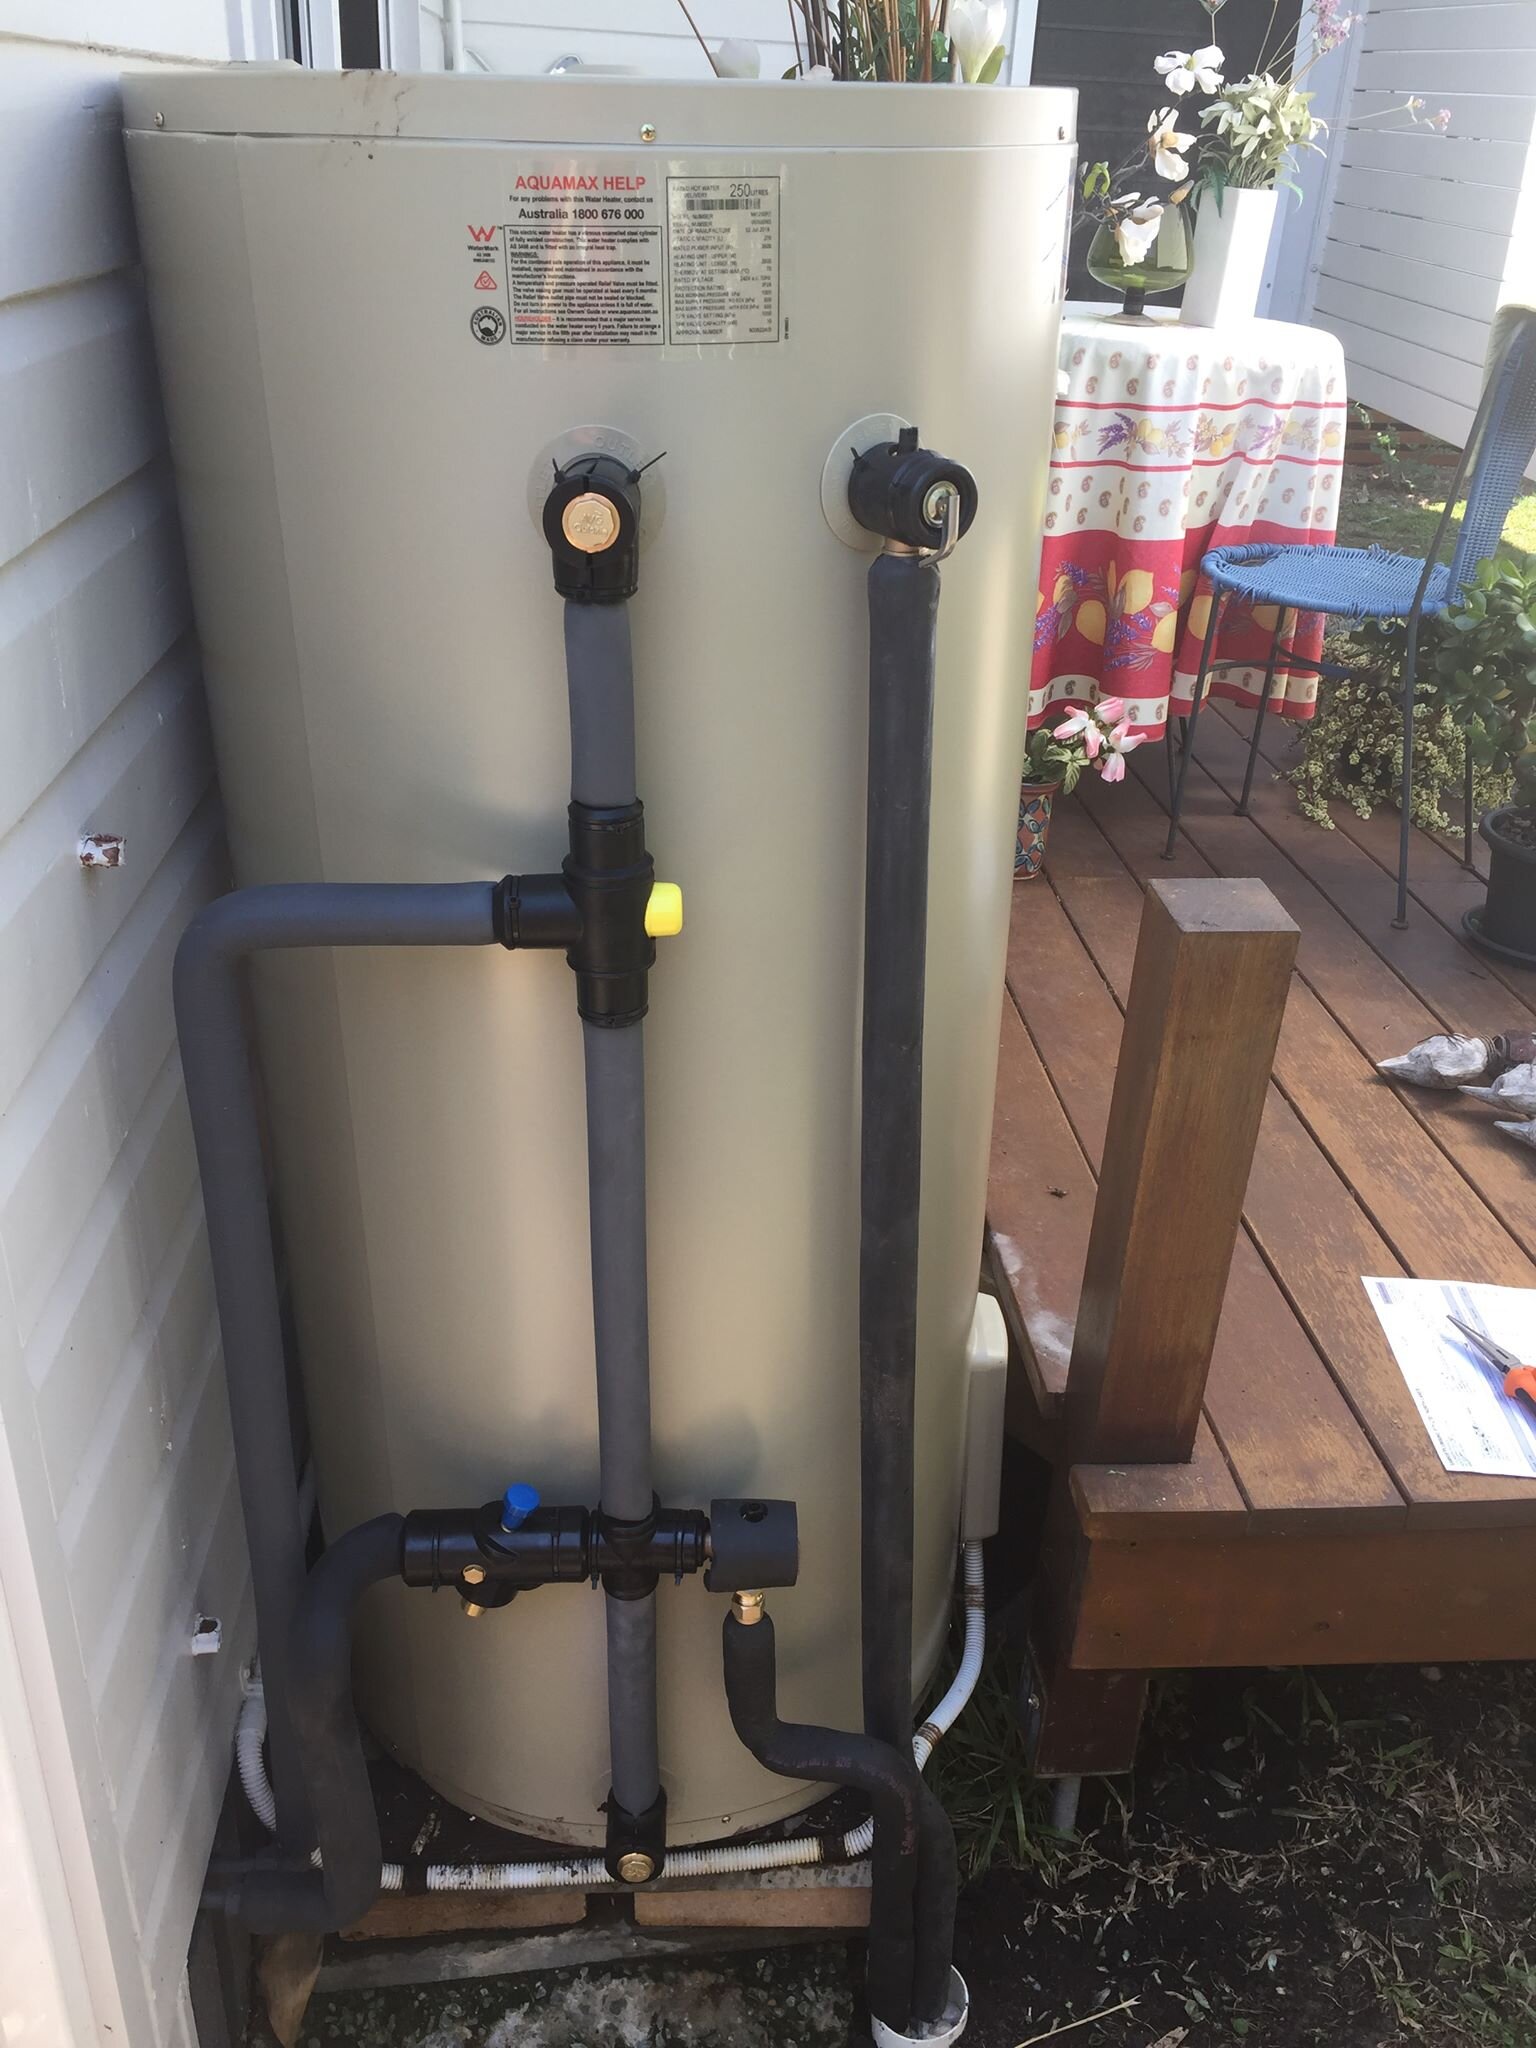 New hot water system